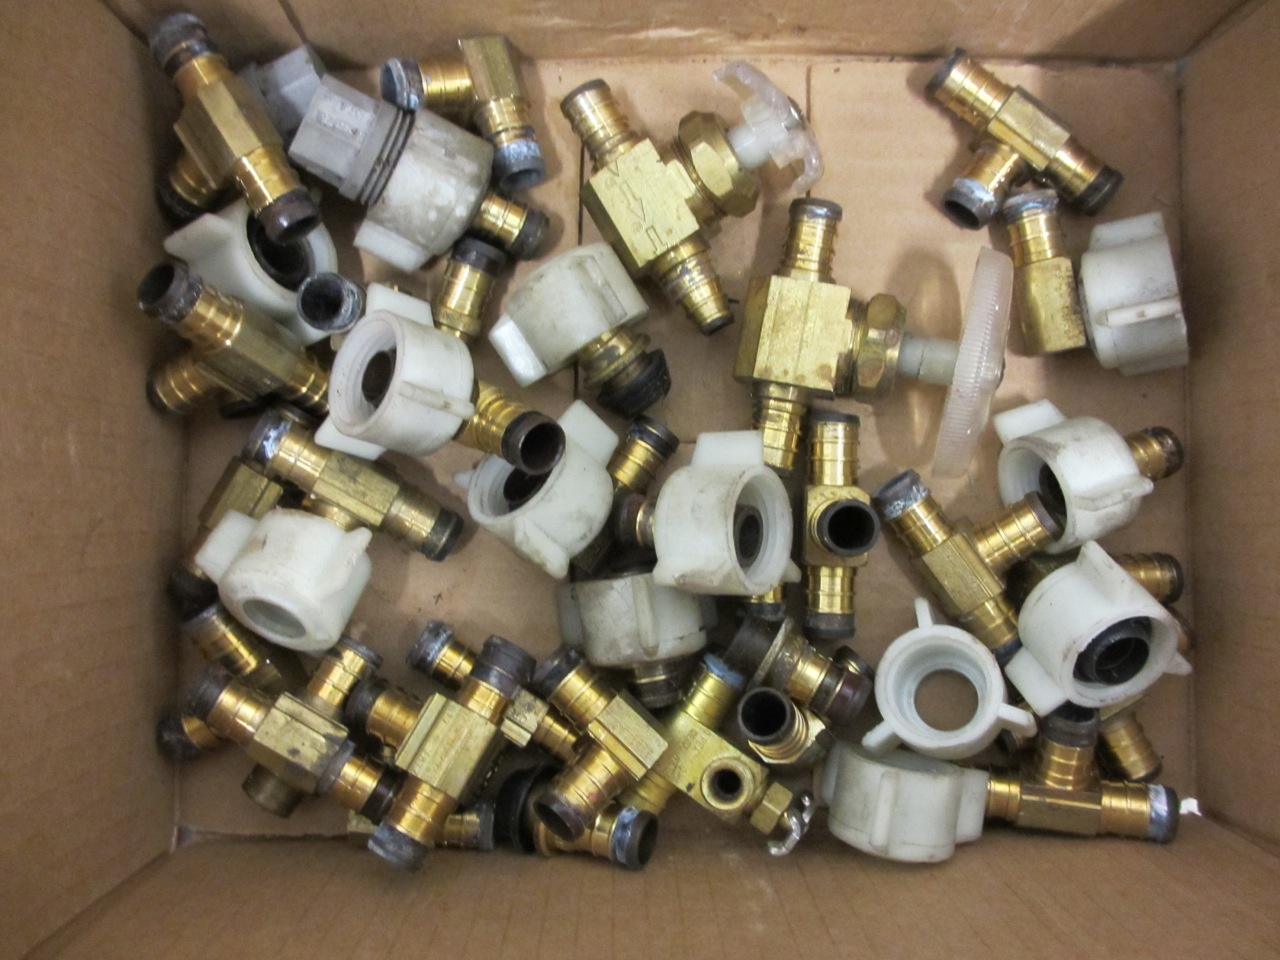  Box full of brass fittings to be reused. 